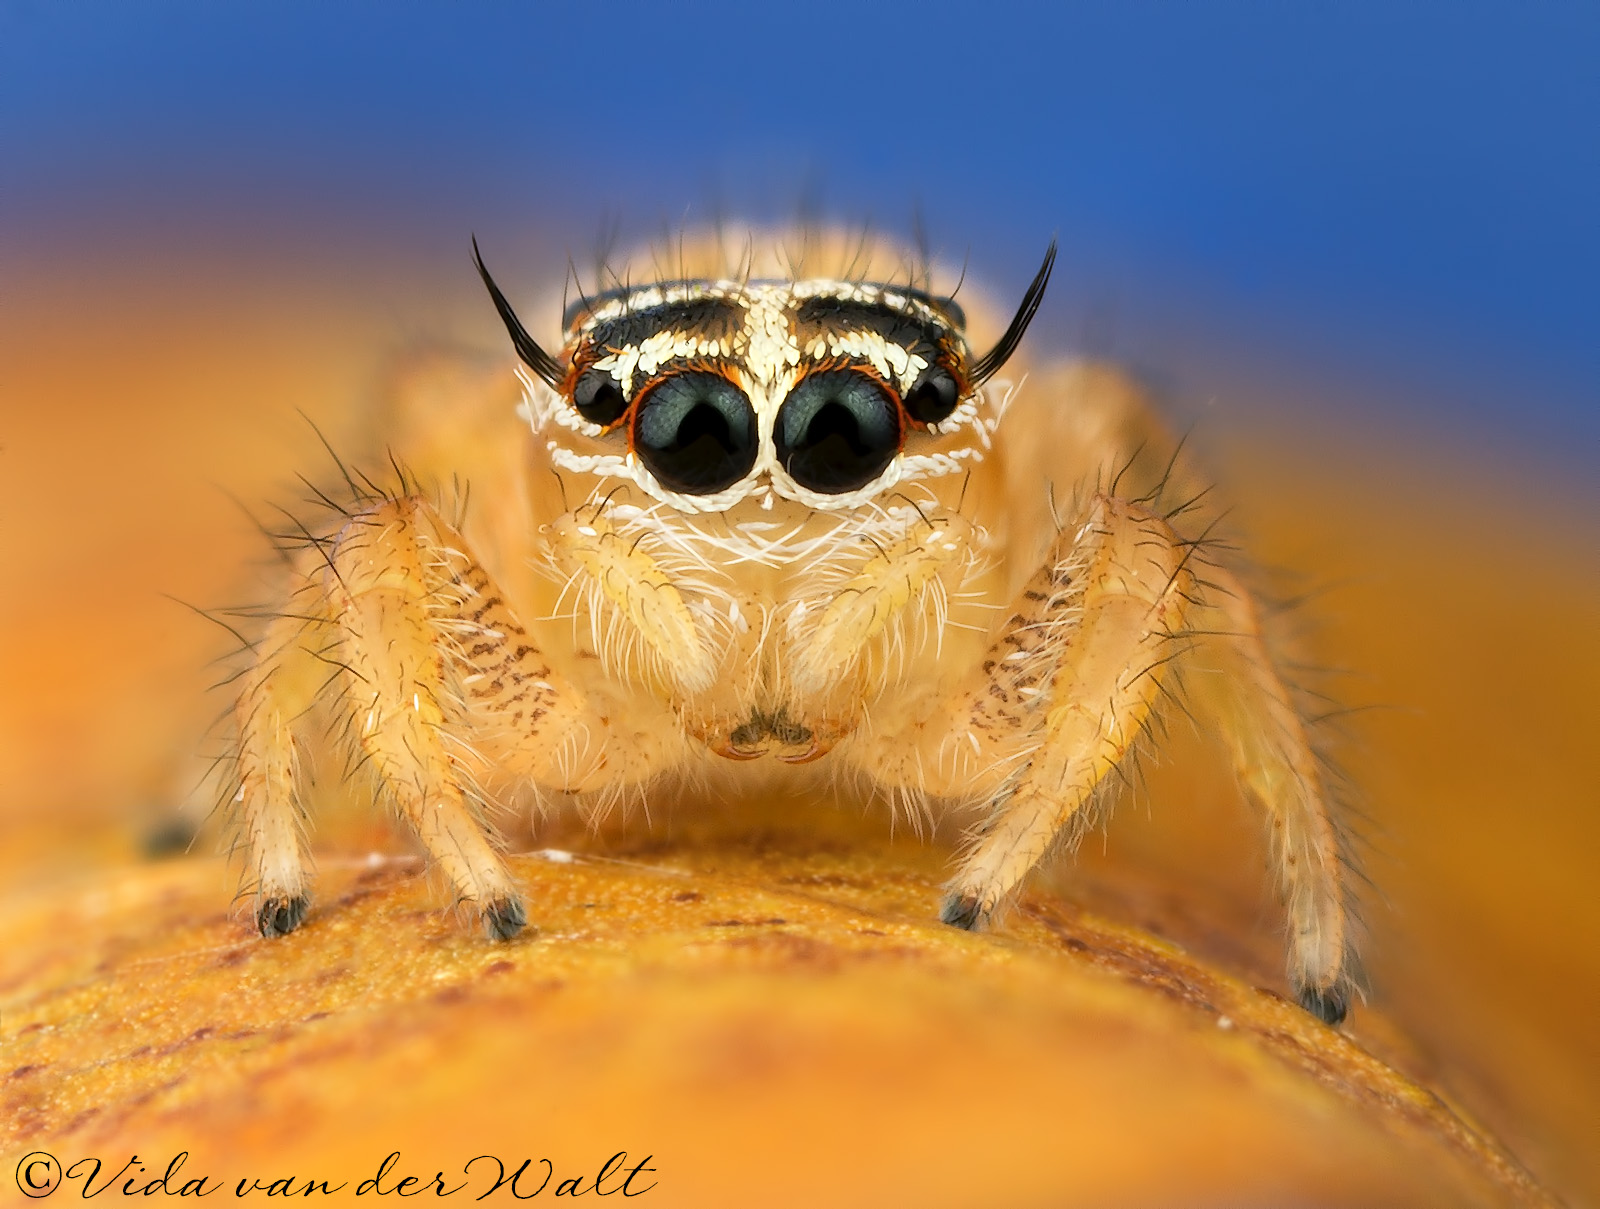 http://www.jumpingspiders.co.za/images/main/210.jpg